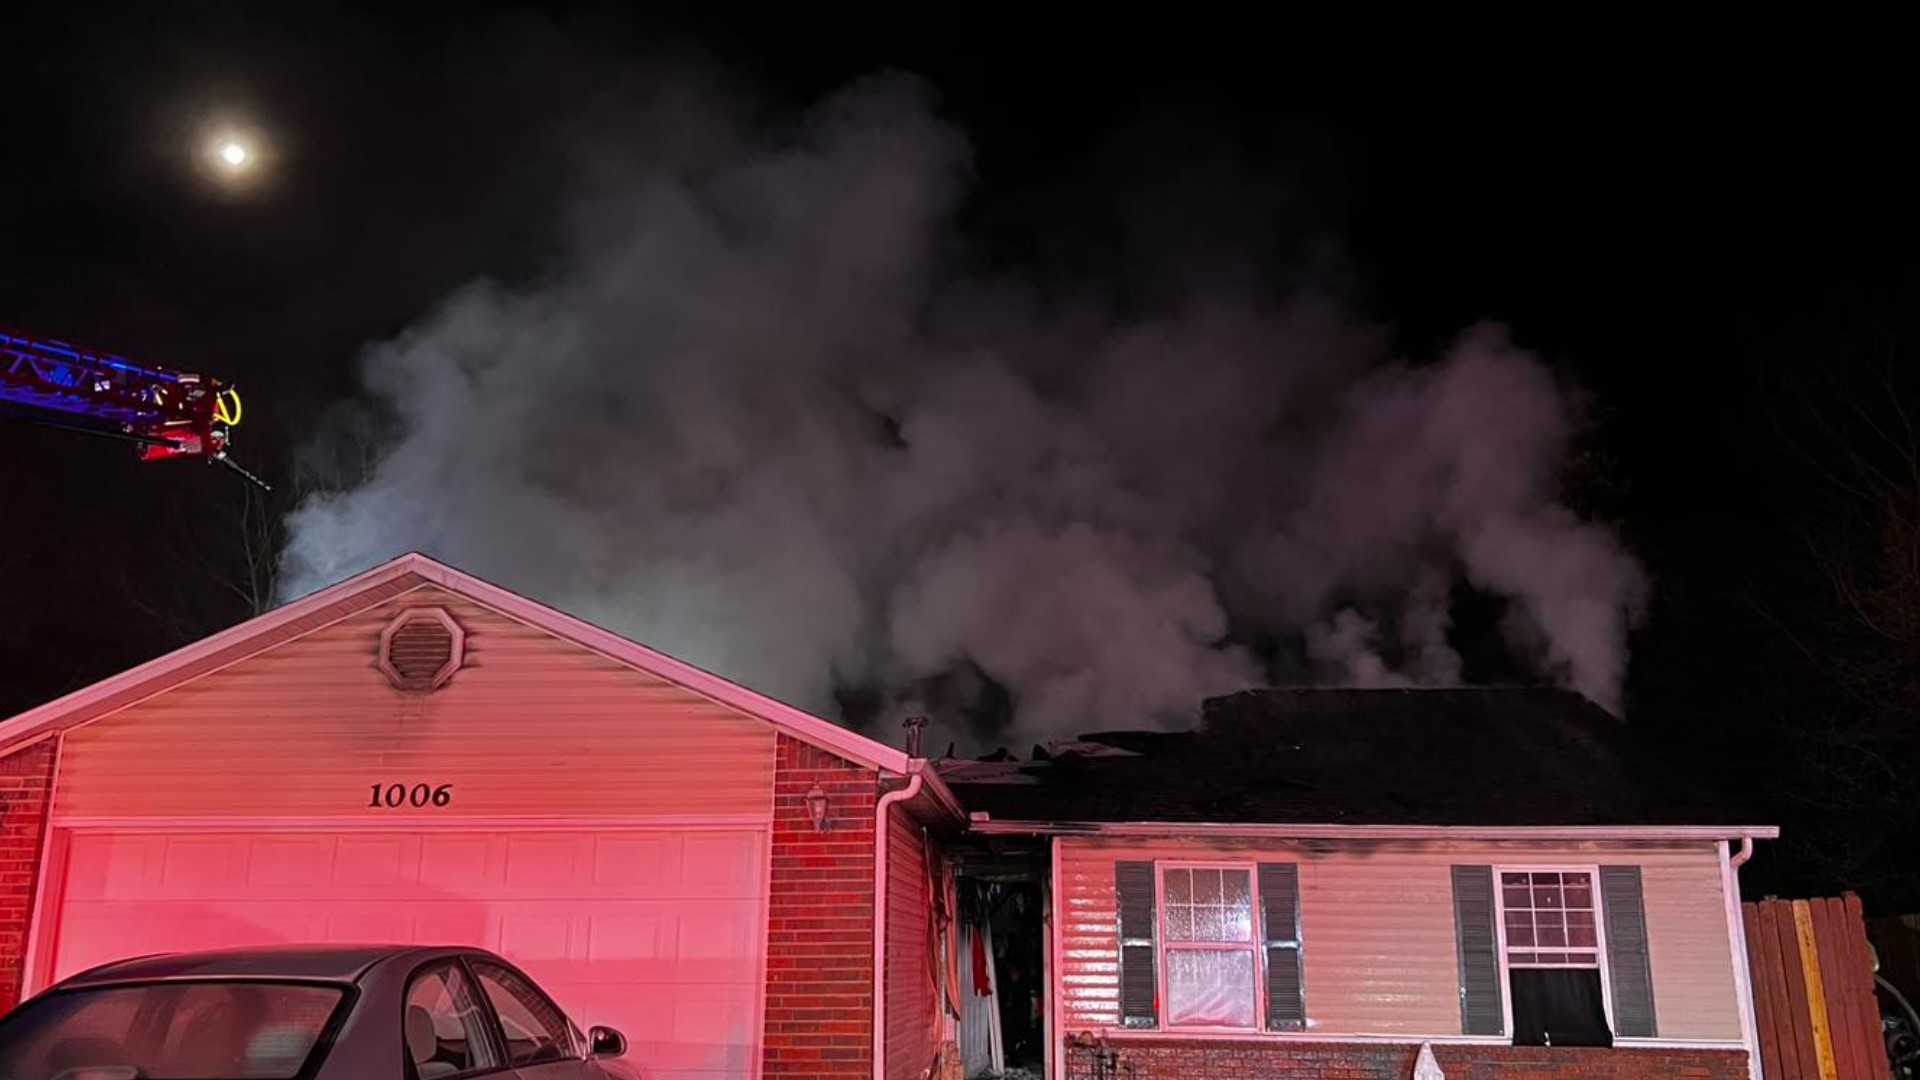 Both fires were on South D Street, with Rogers Fire Department responding to the first incident around 1:30 a.m. this morning.